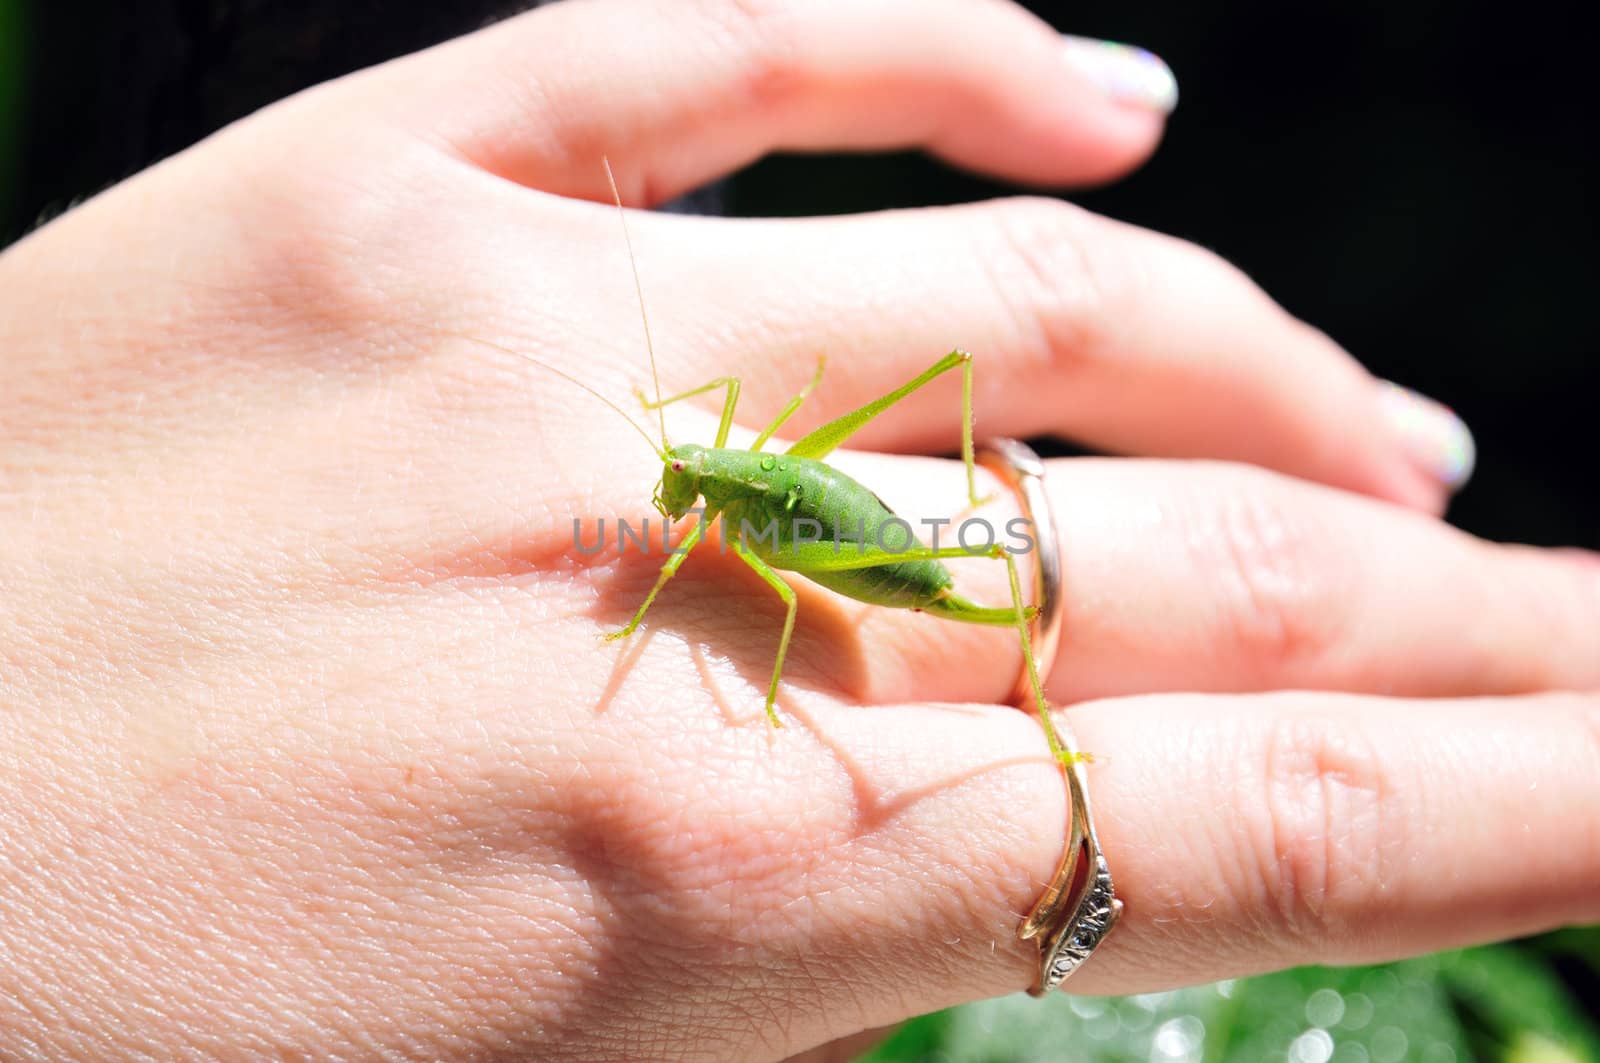 green little grasshopper sitting on the woman's hand